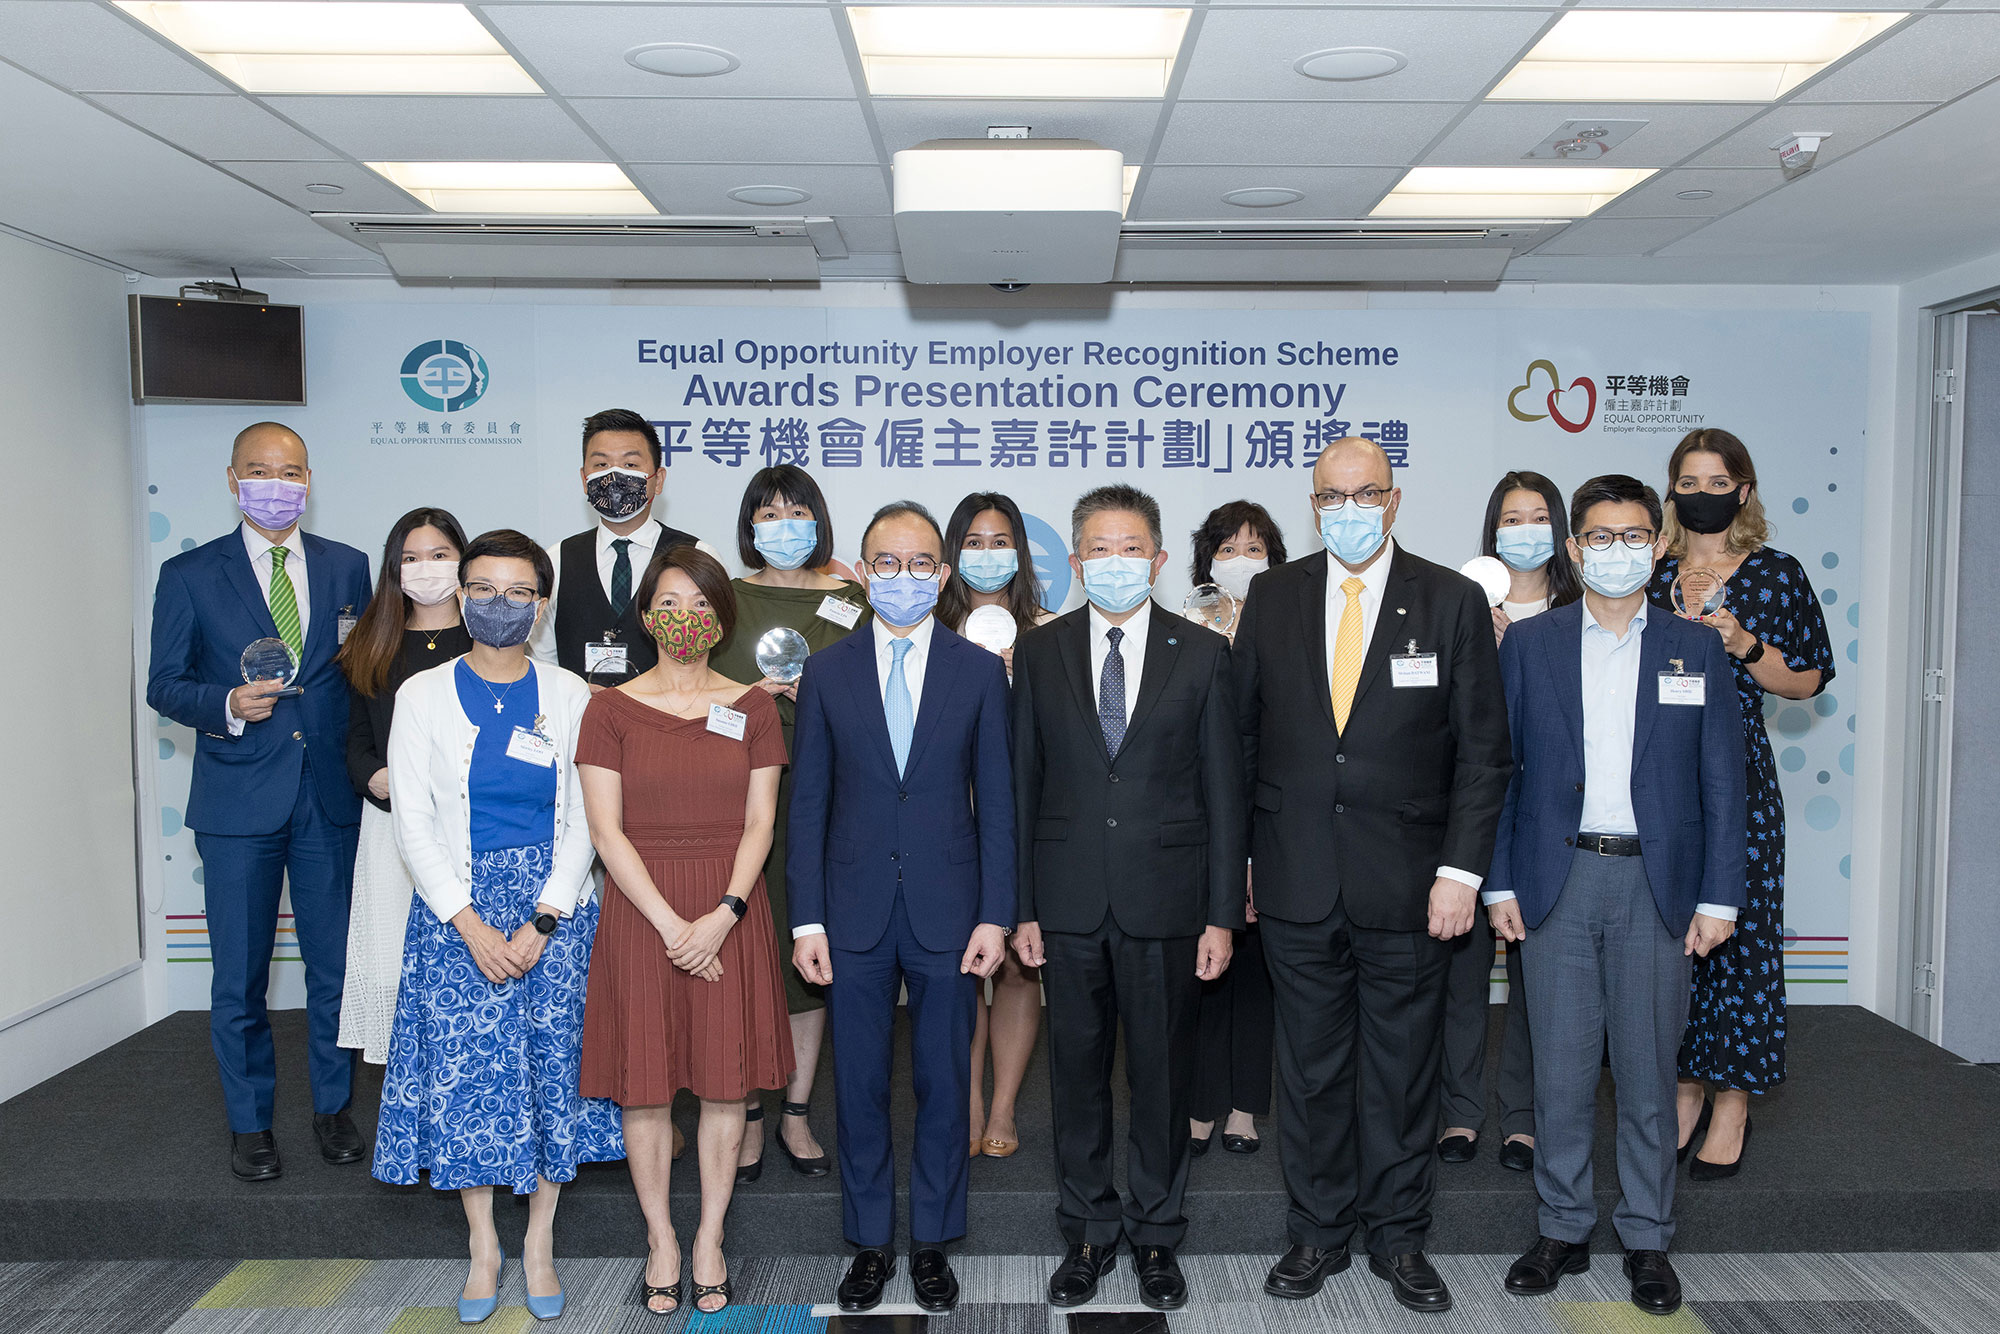 Mr Erick TSANG Kwok-wai, IDSM, JP, Secretary for Constitutional and Mainland Affairs (front row, third left) and Mr Ricky CHU Man-kin, IDS, Chairperson of the EOC (front row, third right) join in a group photo with awardees of the Equal Opportunity Employer SME Award.